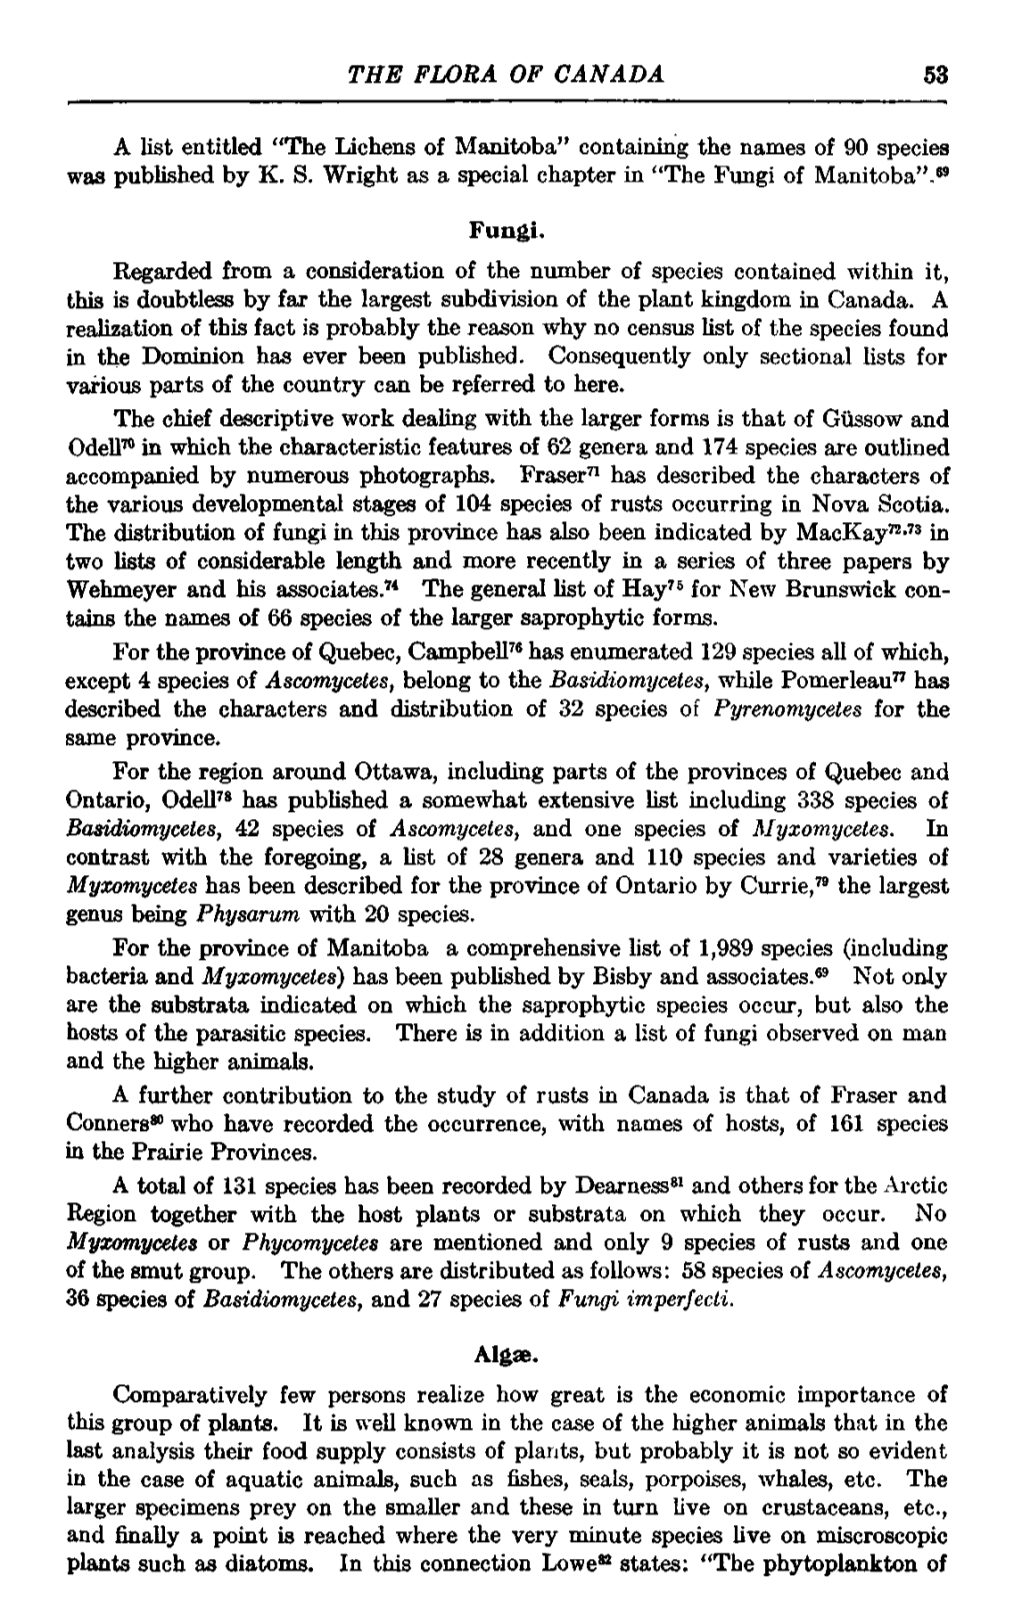 THE FLORA of CANADA 53 a List Entitled "The Lichens of Manitoba" Containing the Names of 90 Species Was Published by K